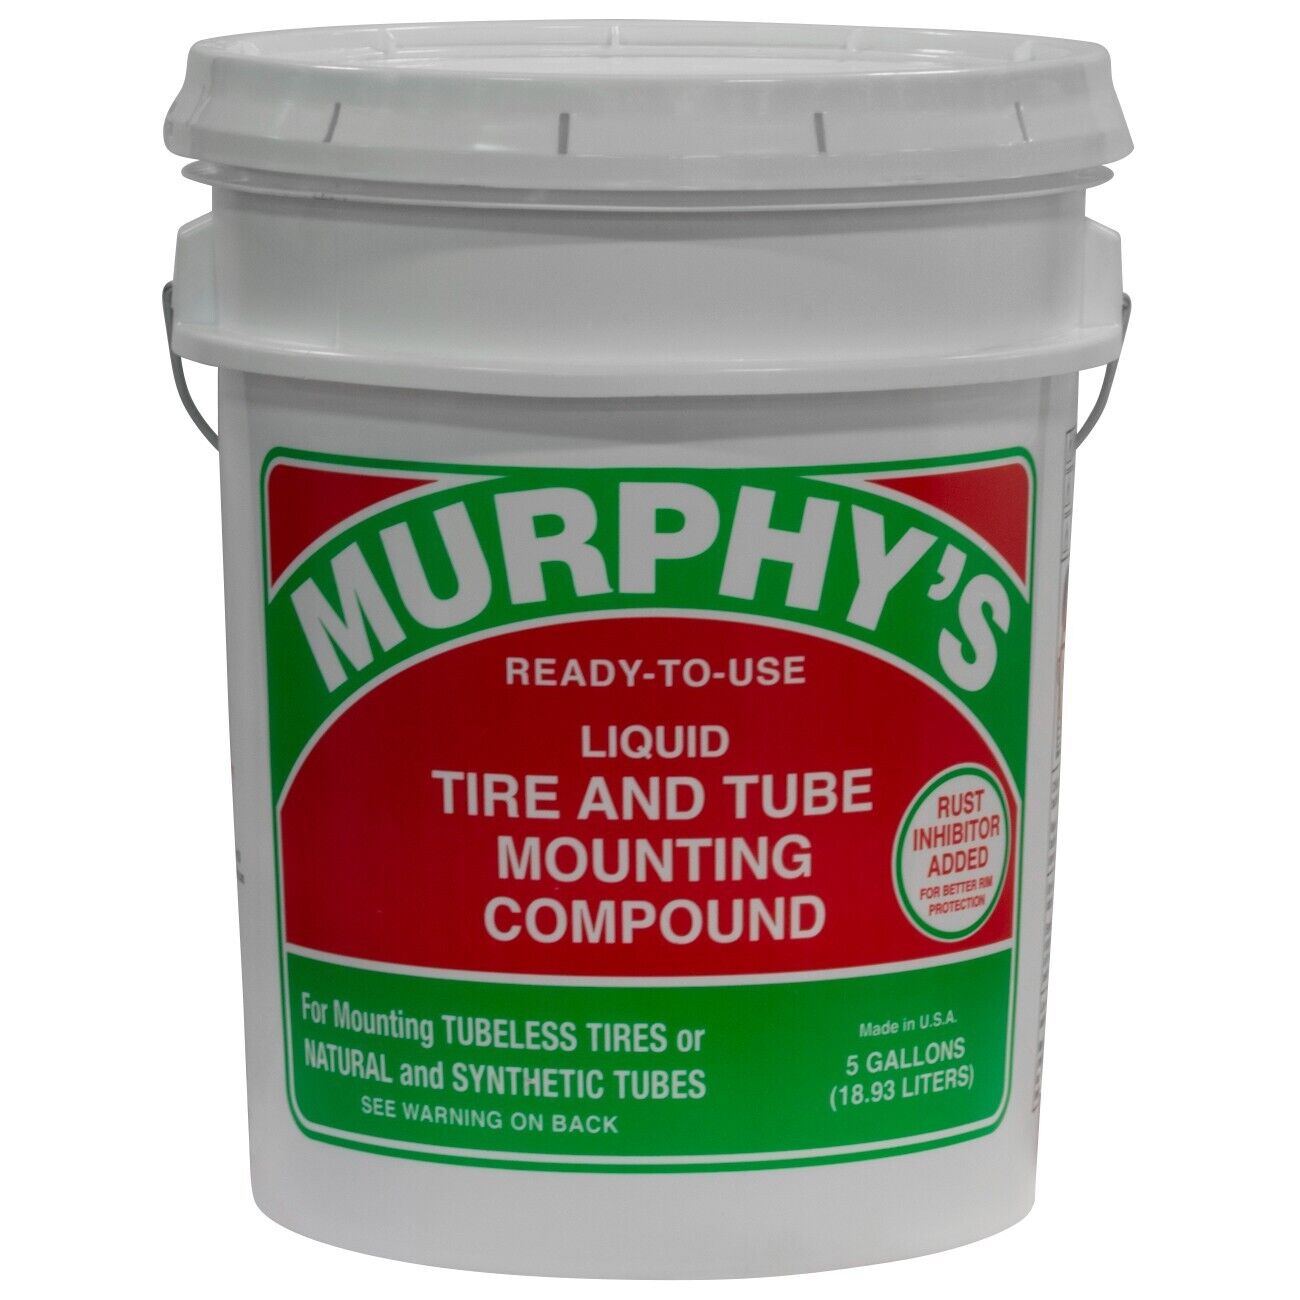 Murphy's Ready to Use Liquid Tire And Tube Mounting Compound 5 Gallon Bucket